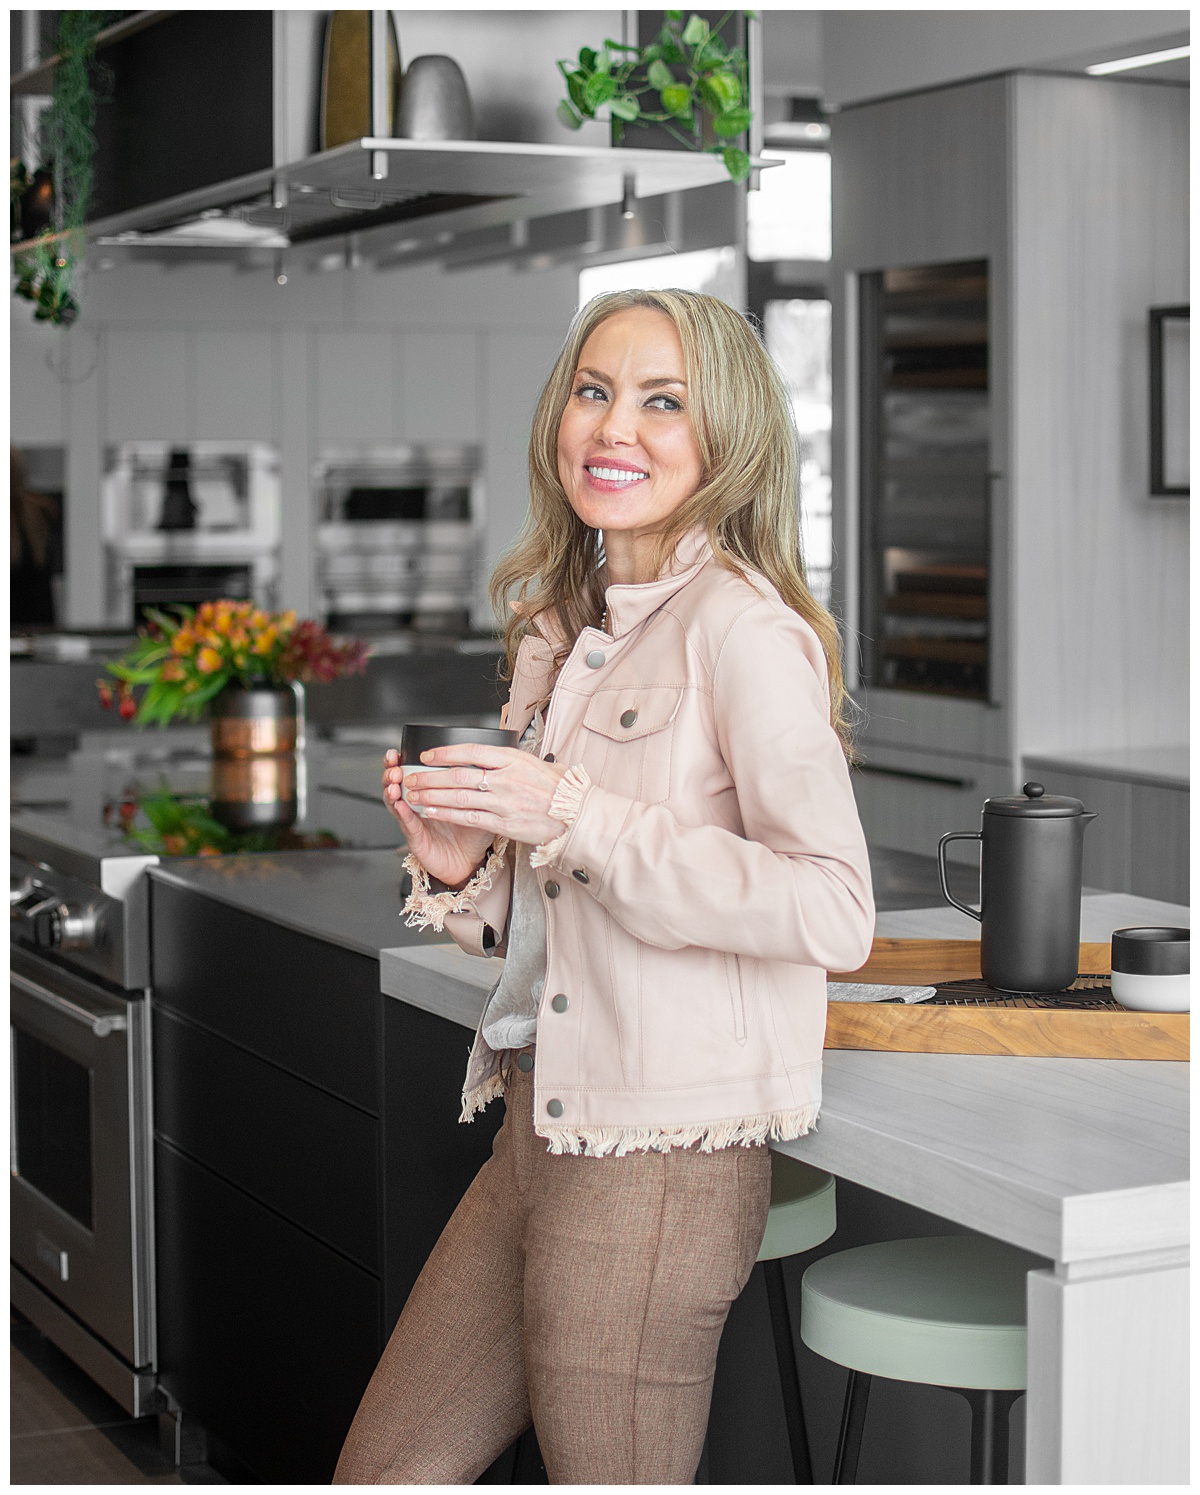 A woman stands in a kitchen showcasing her interior design. She is wearing a pink jean jacket and drinking from a cup. The kitchen is gray with stainless steel appliances and greenery accents.